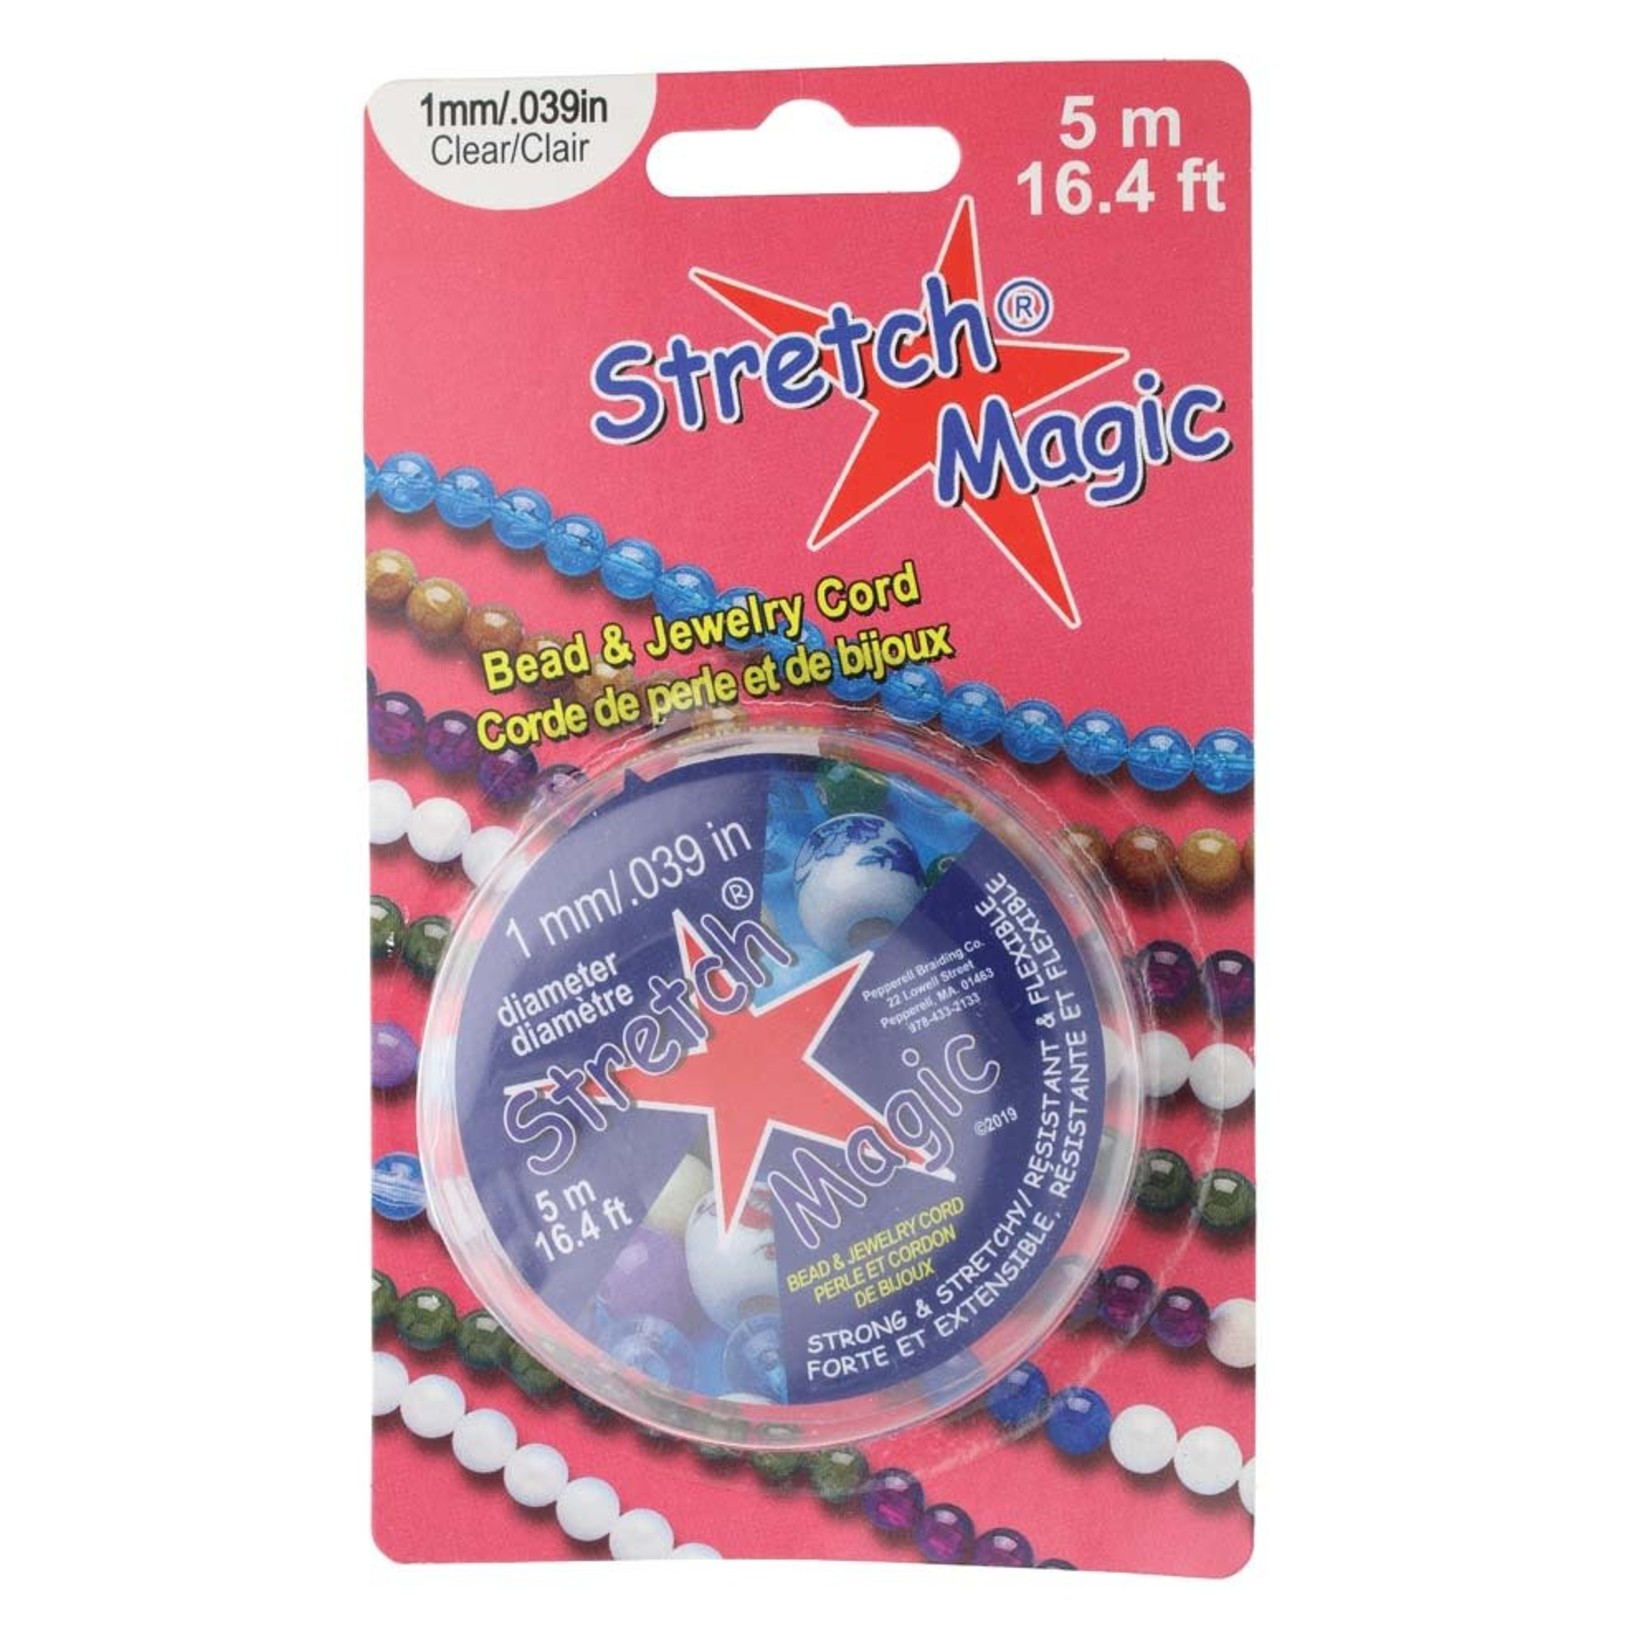 Stretch Magic Bead & Jewelry Cord 1mm Clear 5 meters